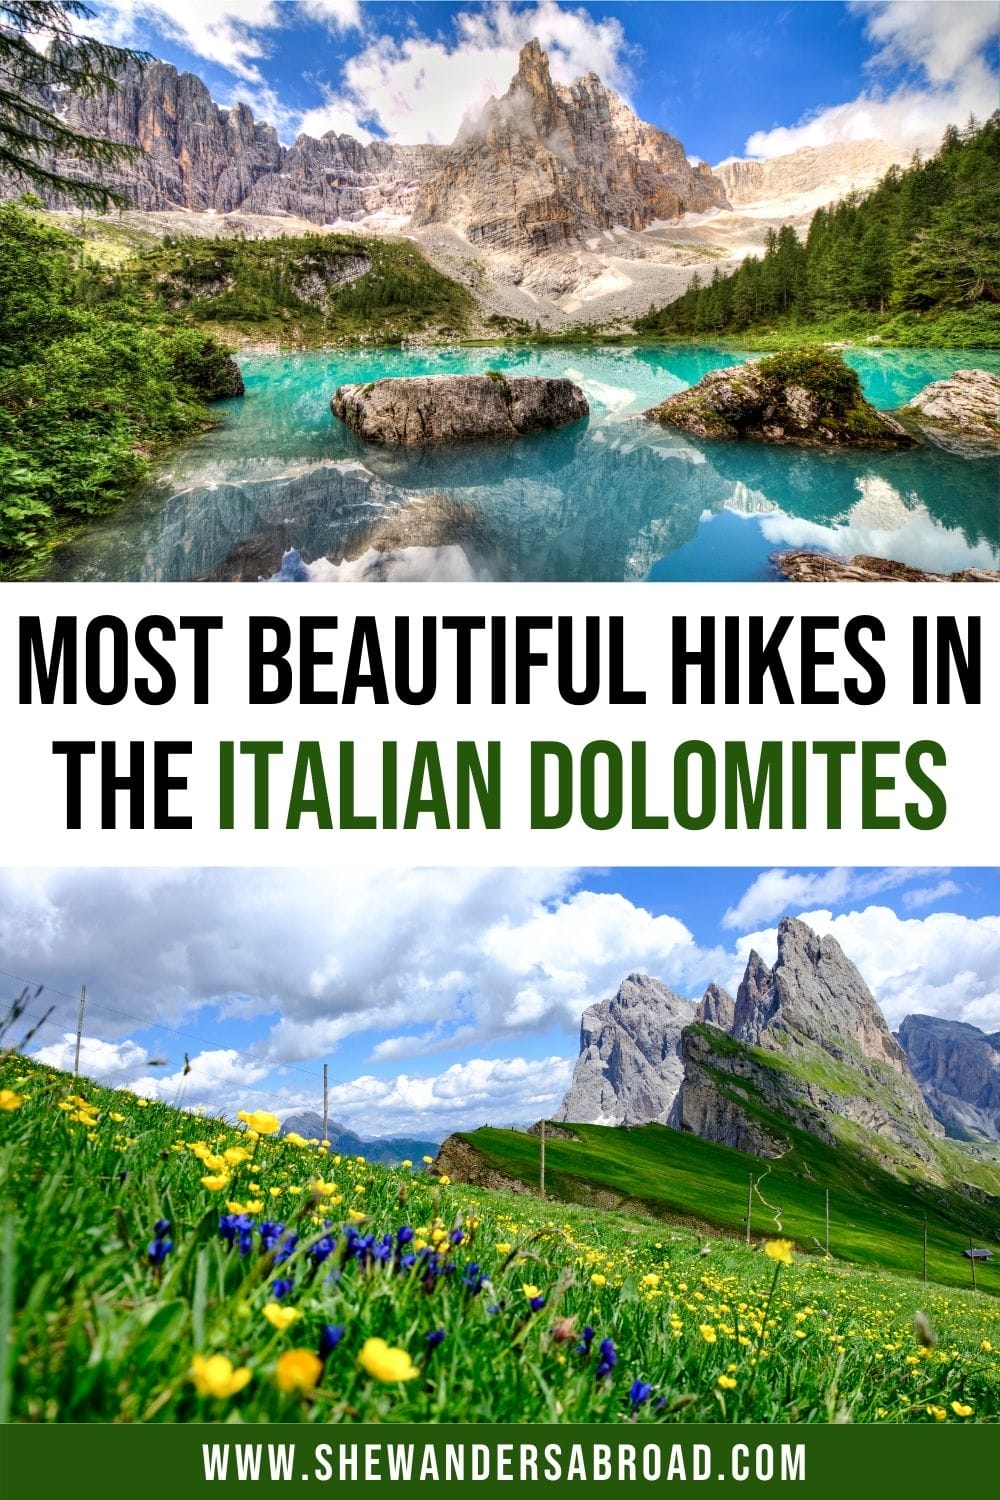 13 Best hikes in the Dolomites You Don't Want to Miss